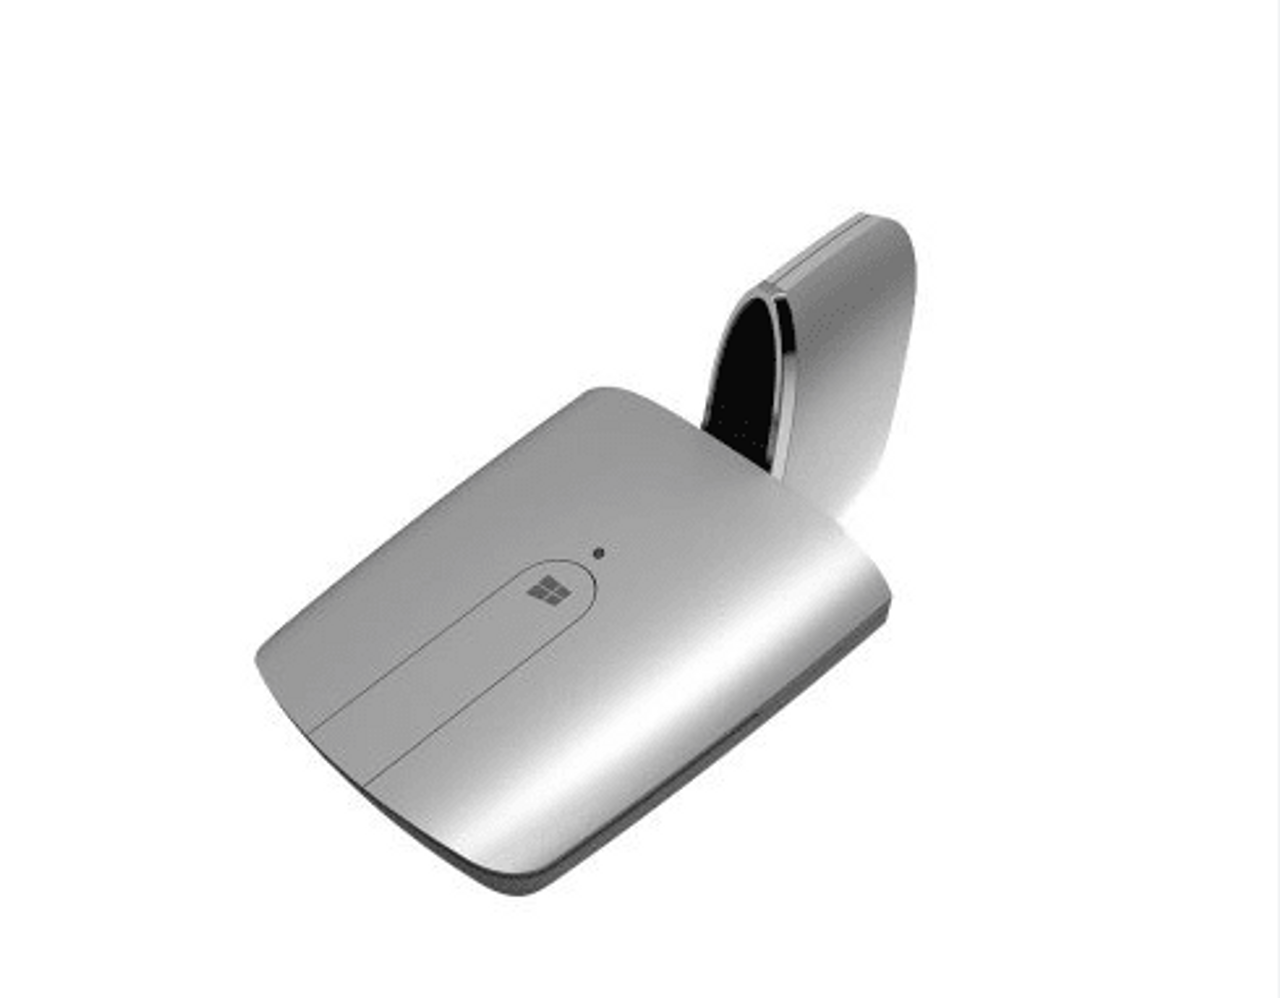 Lenovo Yoga Mouse with 2.4G or Bluetooth 4.0 Wireless Connection